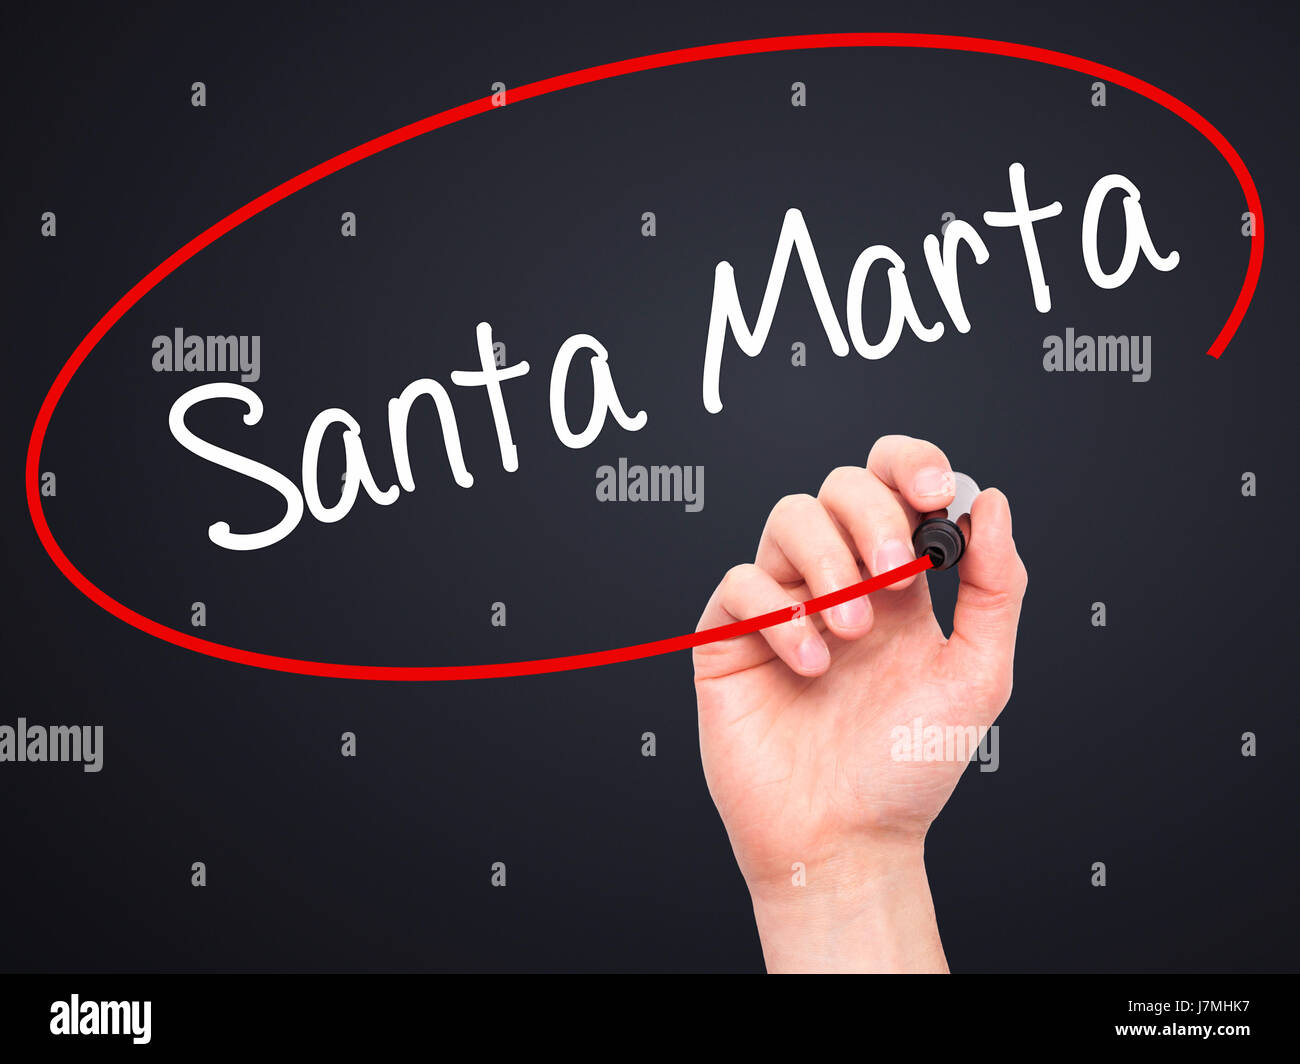 Man Hand writing Santa Marta with black marker on visual screen. Isolated on black. Business, technology, internet concept. Stock Photo